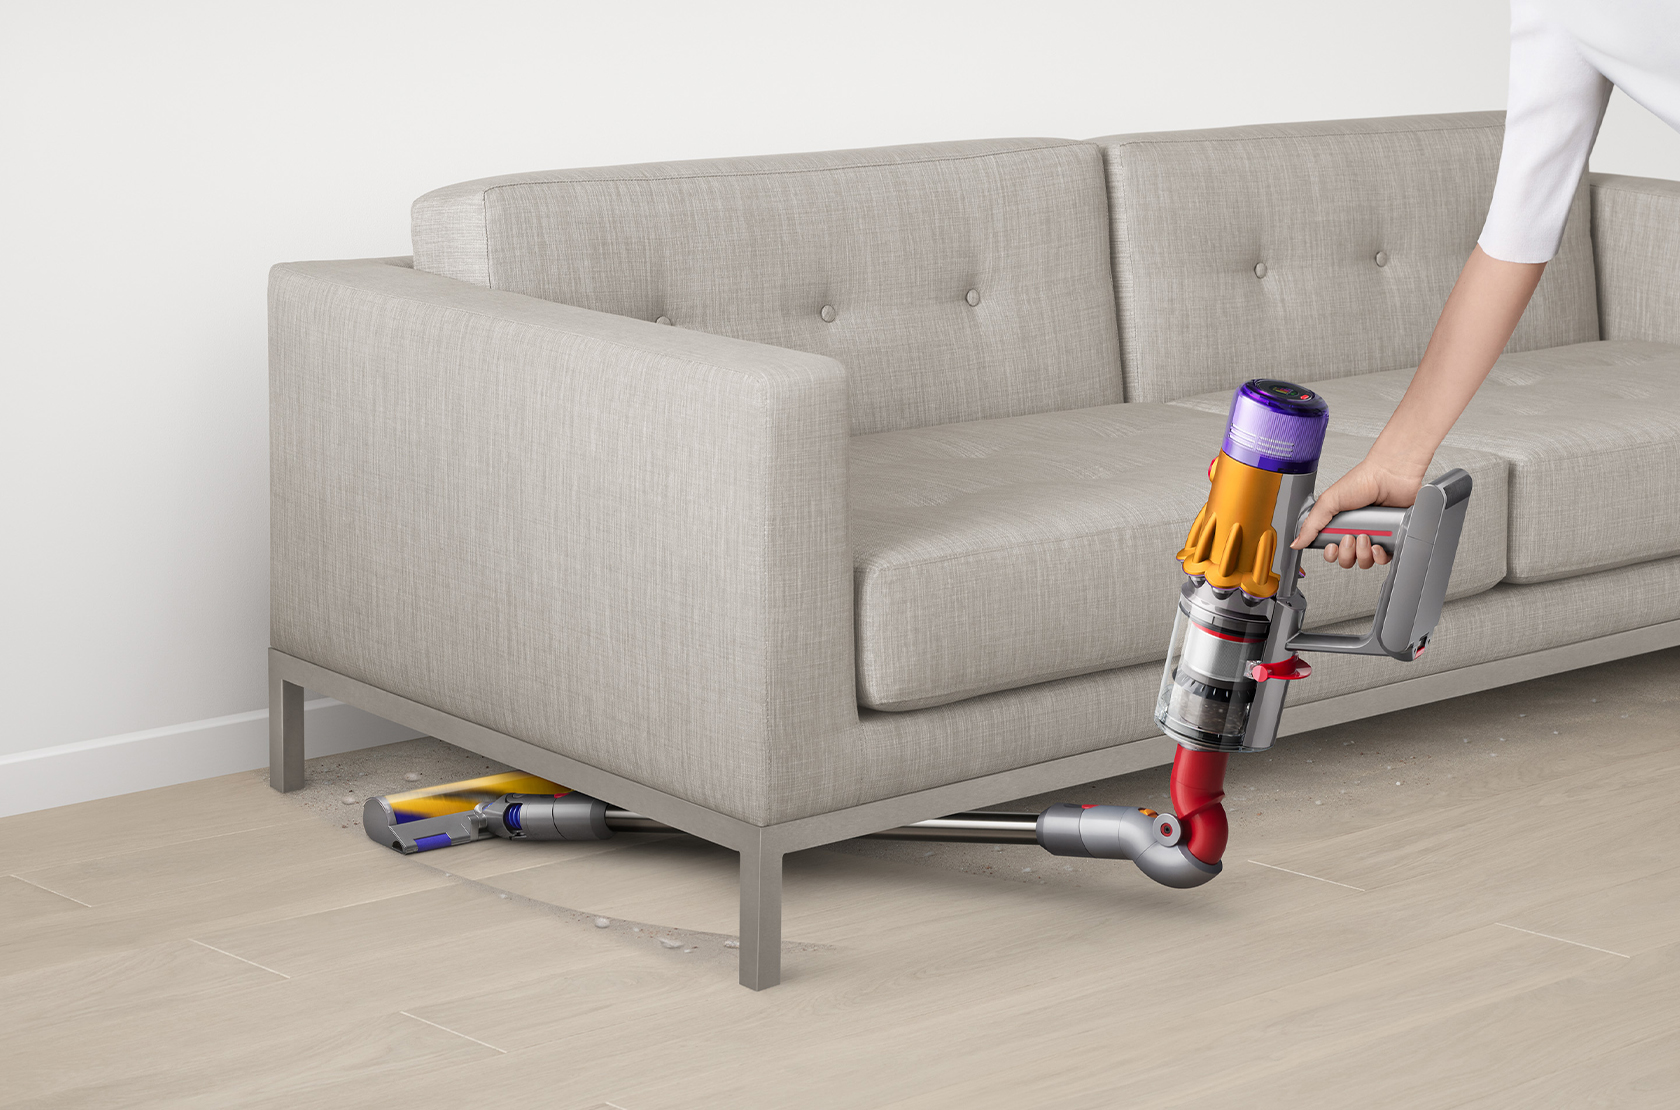 THIS NEW DYSON VACUUM CAN REVEAL HIDDEN DUST WITH ITS GREEN LASER FEATURE